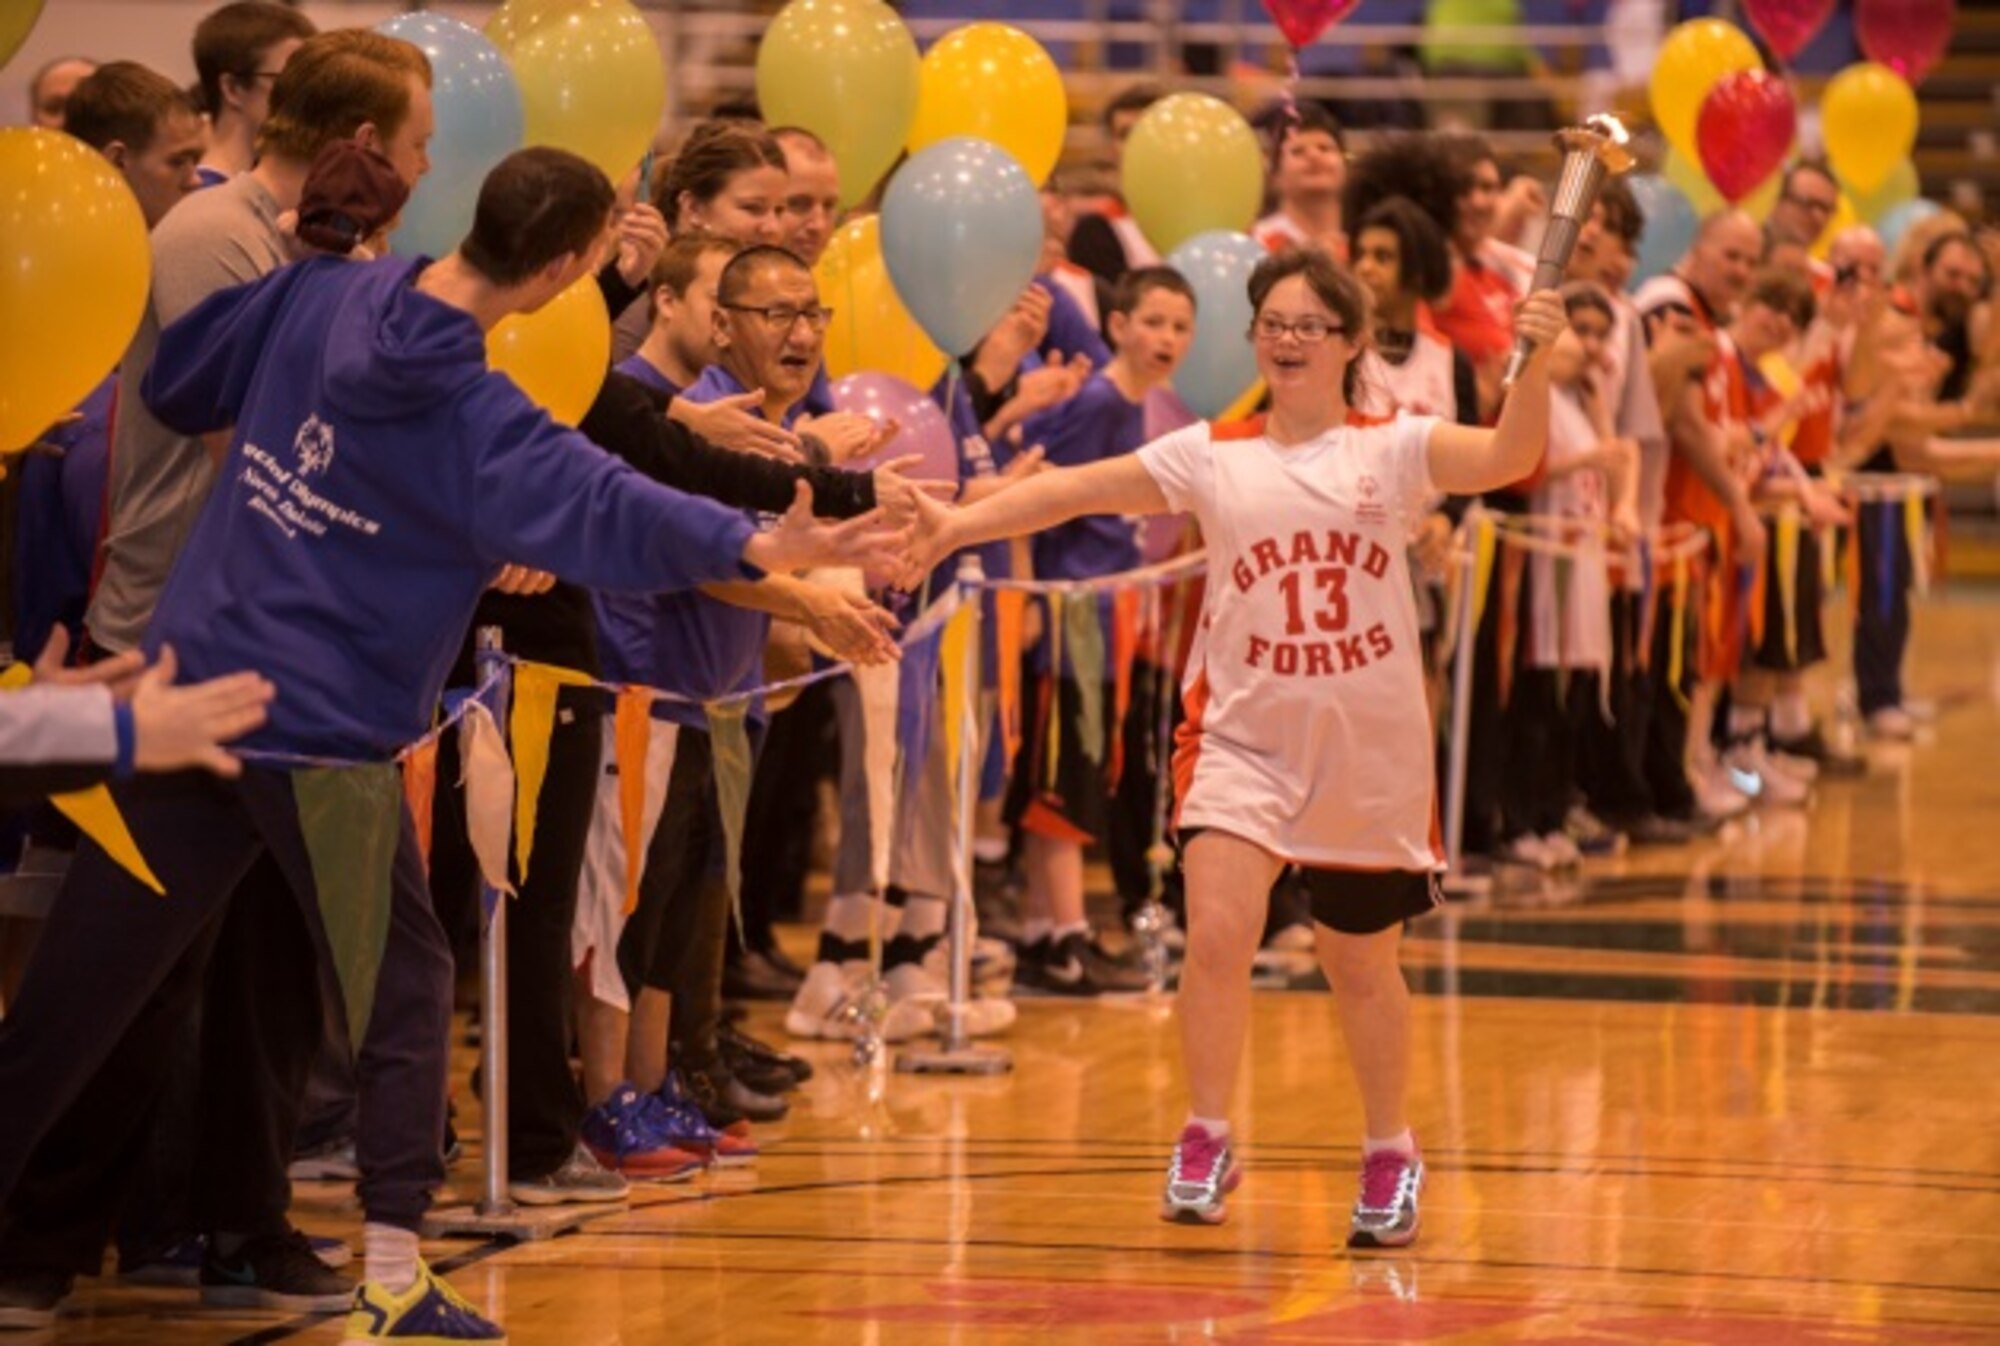 North Dakota Special Olympics female athlete of the year, Bailey Bjorge, carries the torch during the pre-game ceremonies at the North Dakota Special Olympics in Minot, N.D., March 4, 2016. Minot Air Force Base members volunteered at the event as referees and other volunteer positions. (U.S. Air Force photo/Airman 1st Class Christian Sullivan)